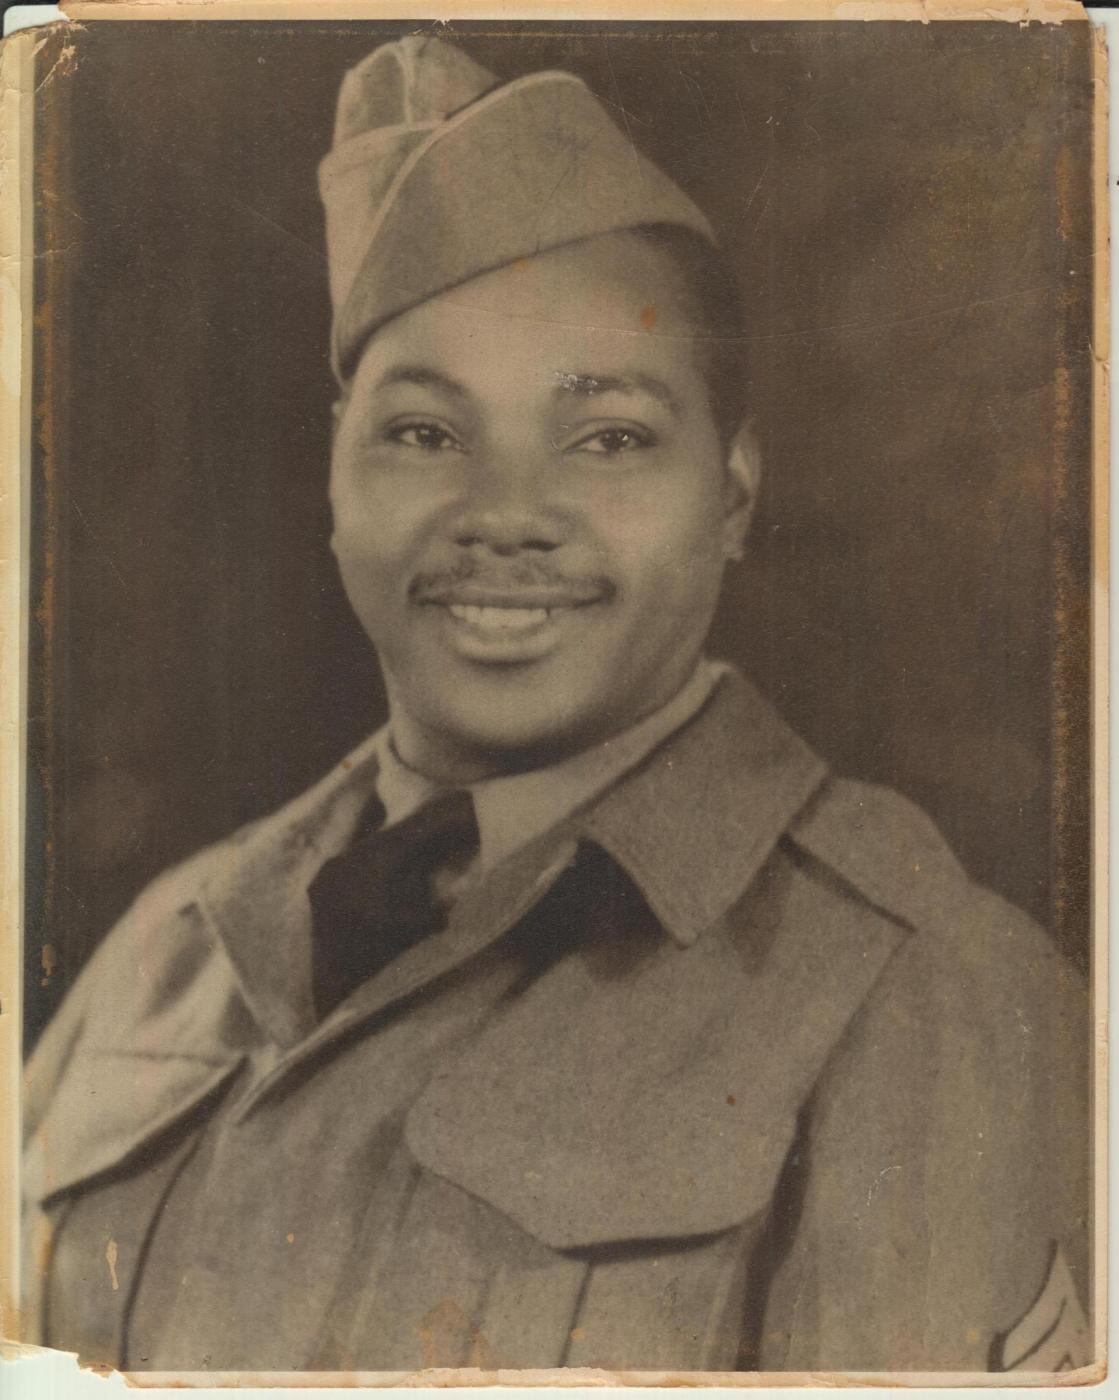 Lawrence Brooks in his younger days. (Courtesy of The National WWII Museum)